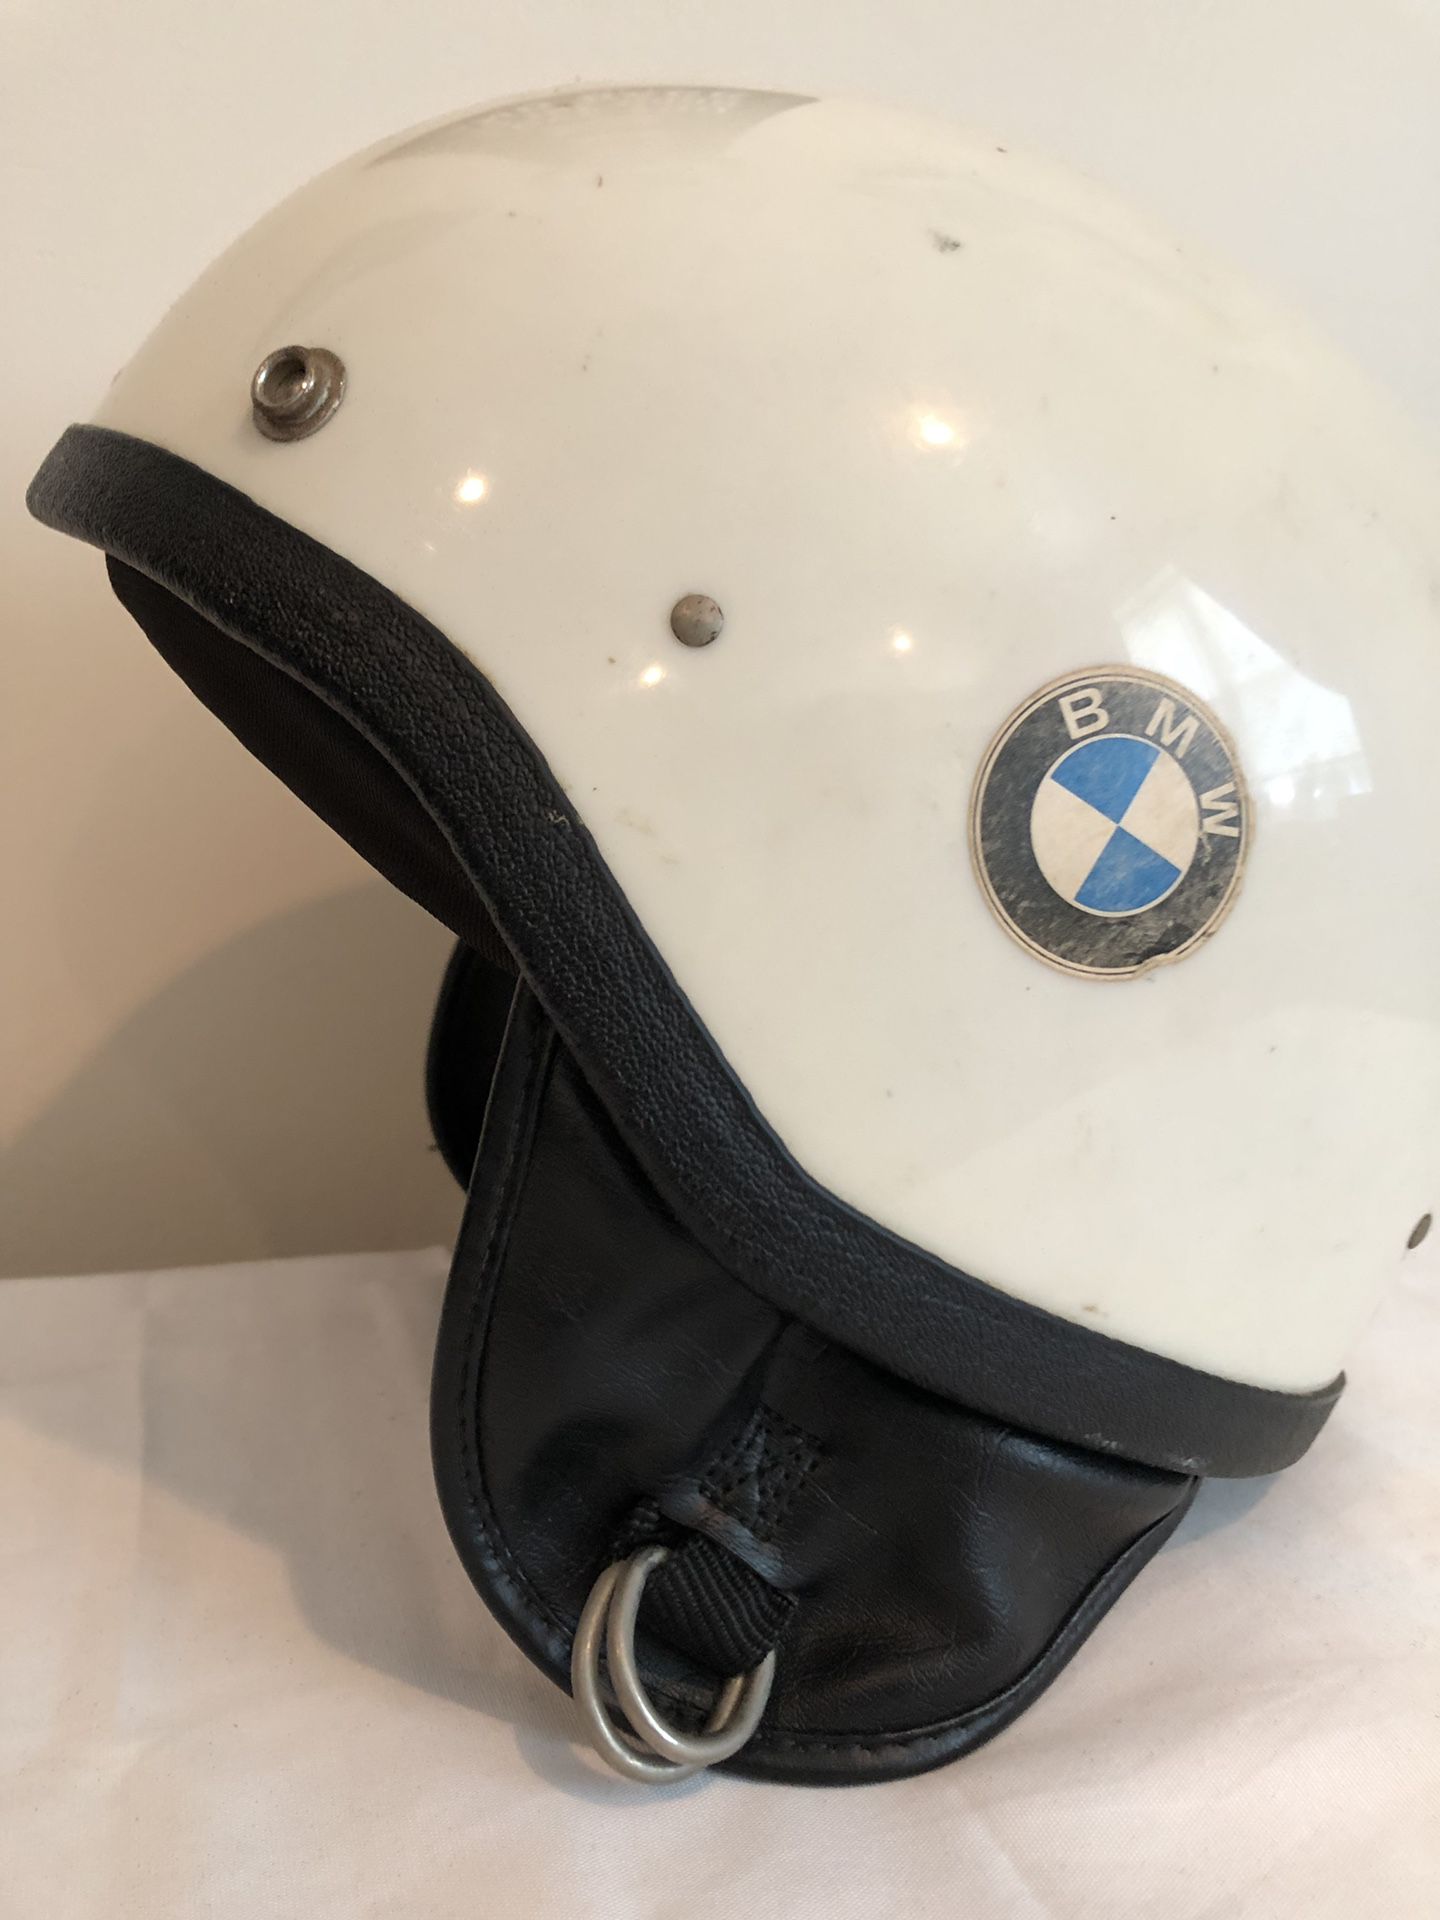 Vintage white bmw motorcycle helmet for Sale in Douglassville, PA - OfferUp